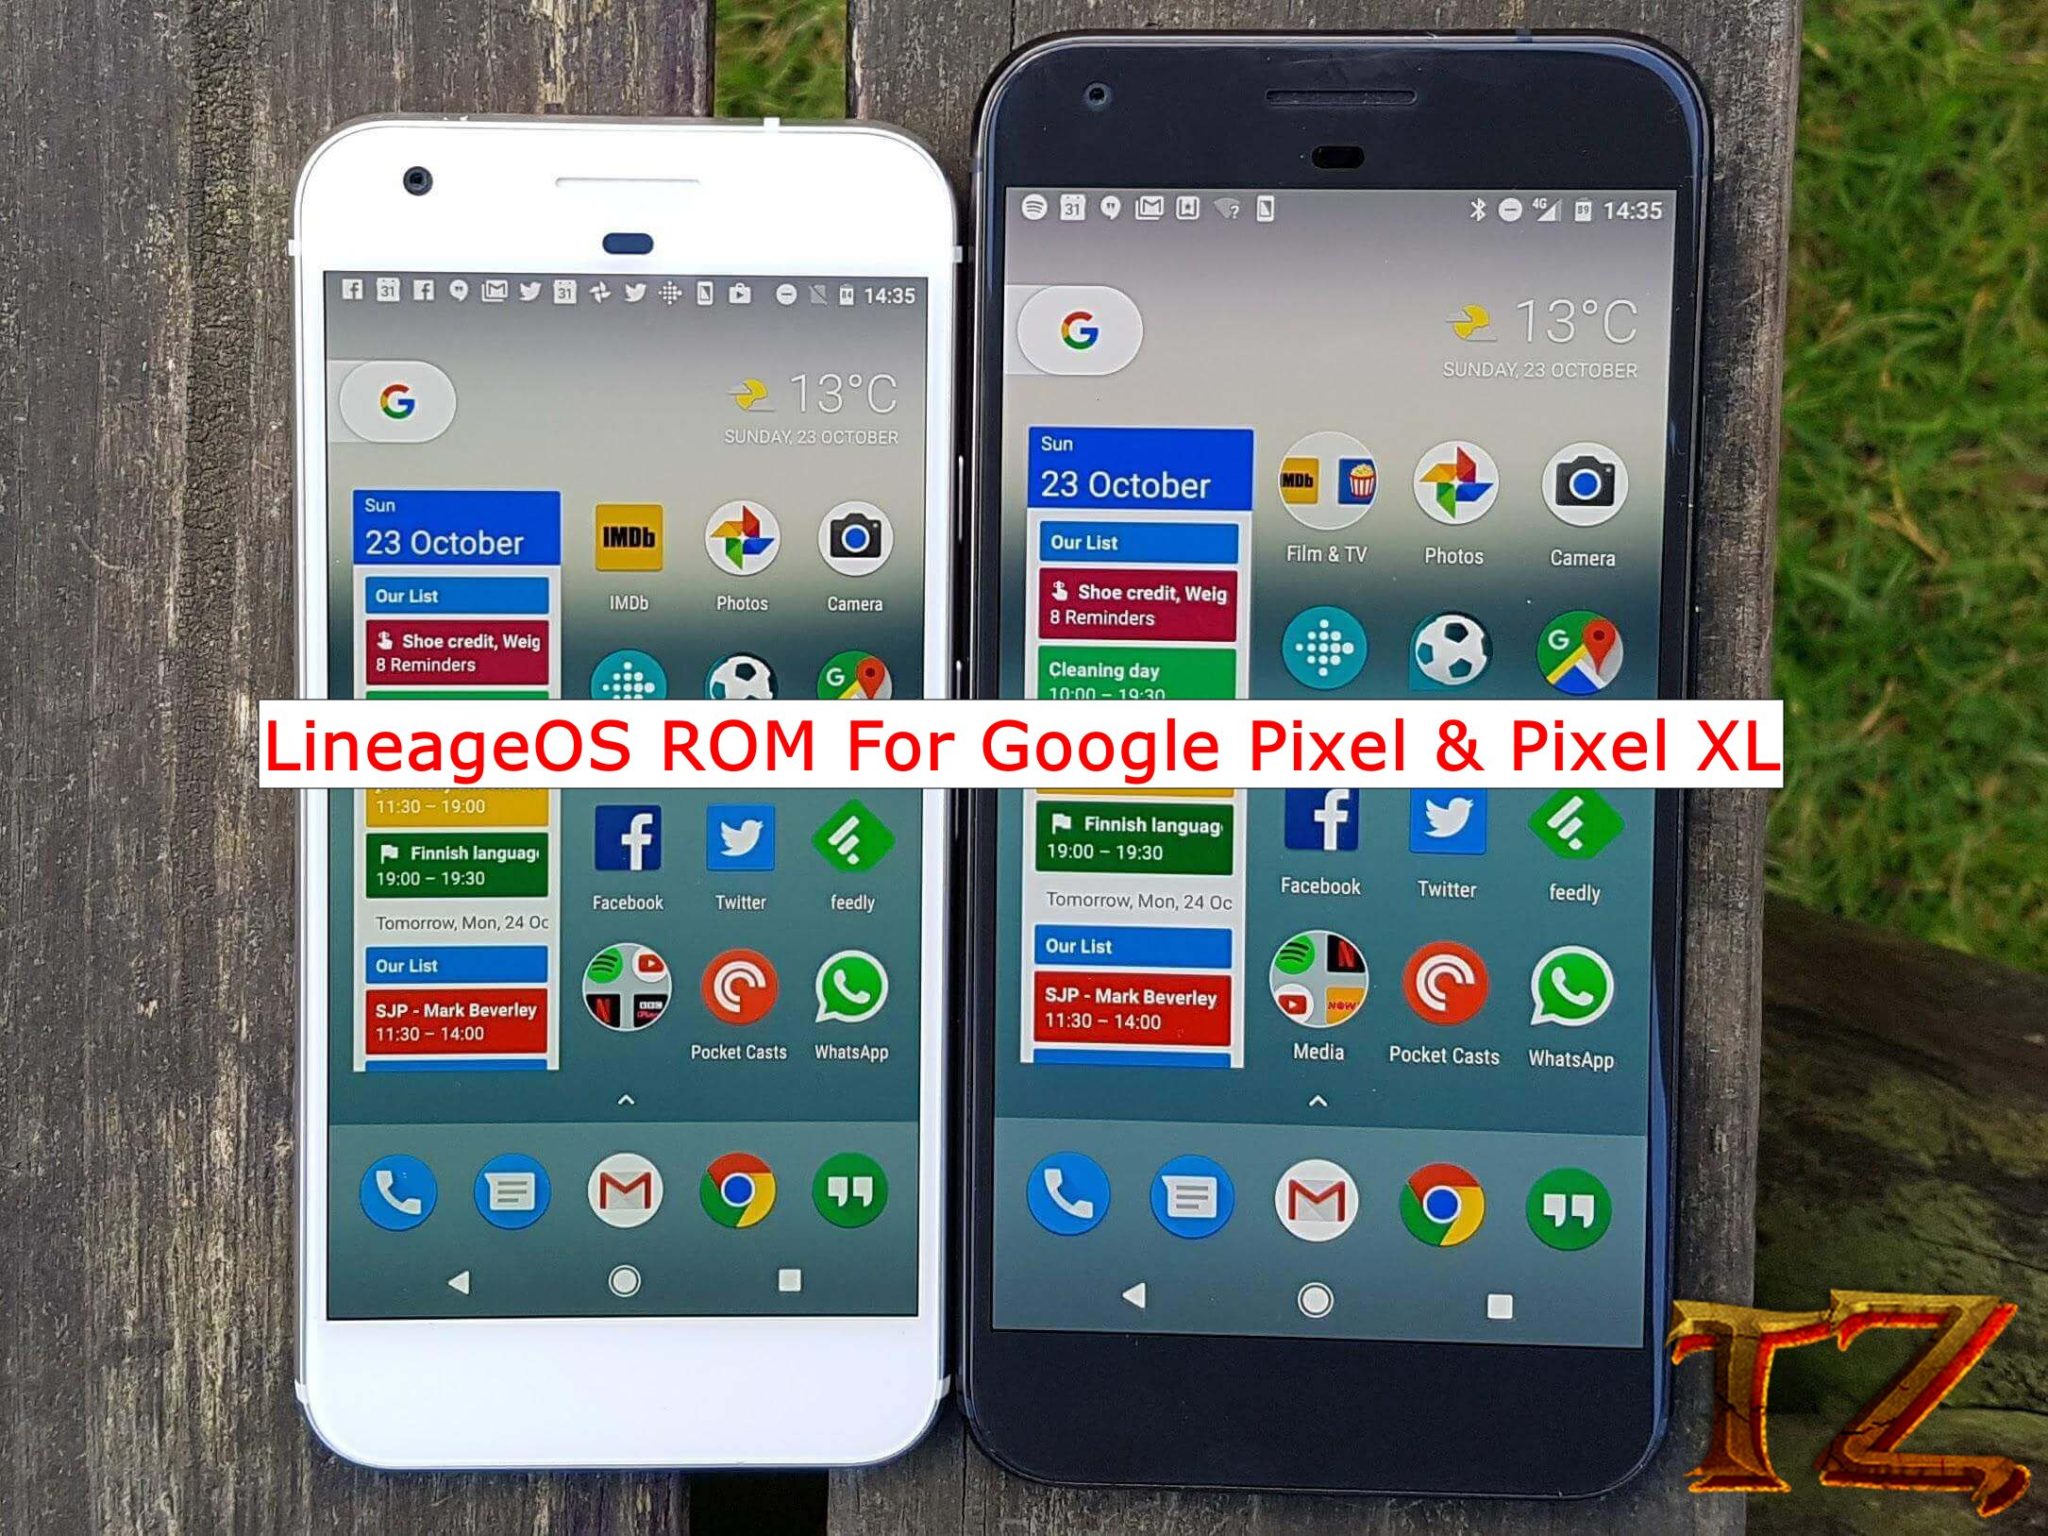 Android Pie ROM for Google Pixel/Pixel XL